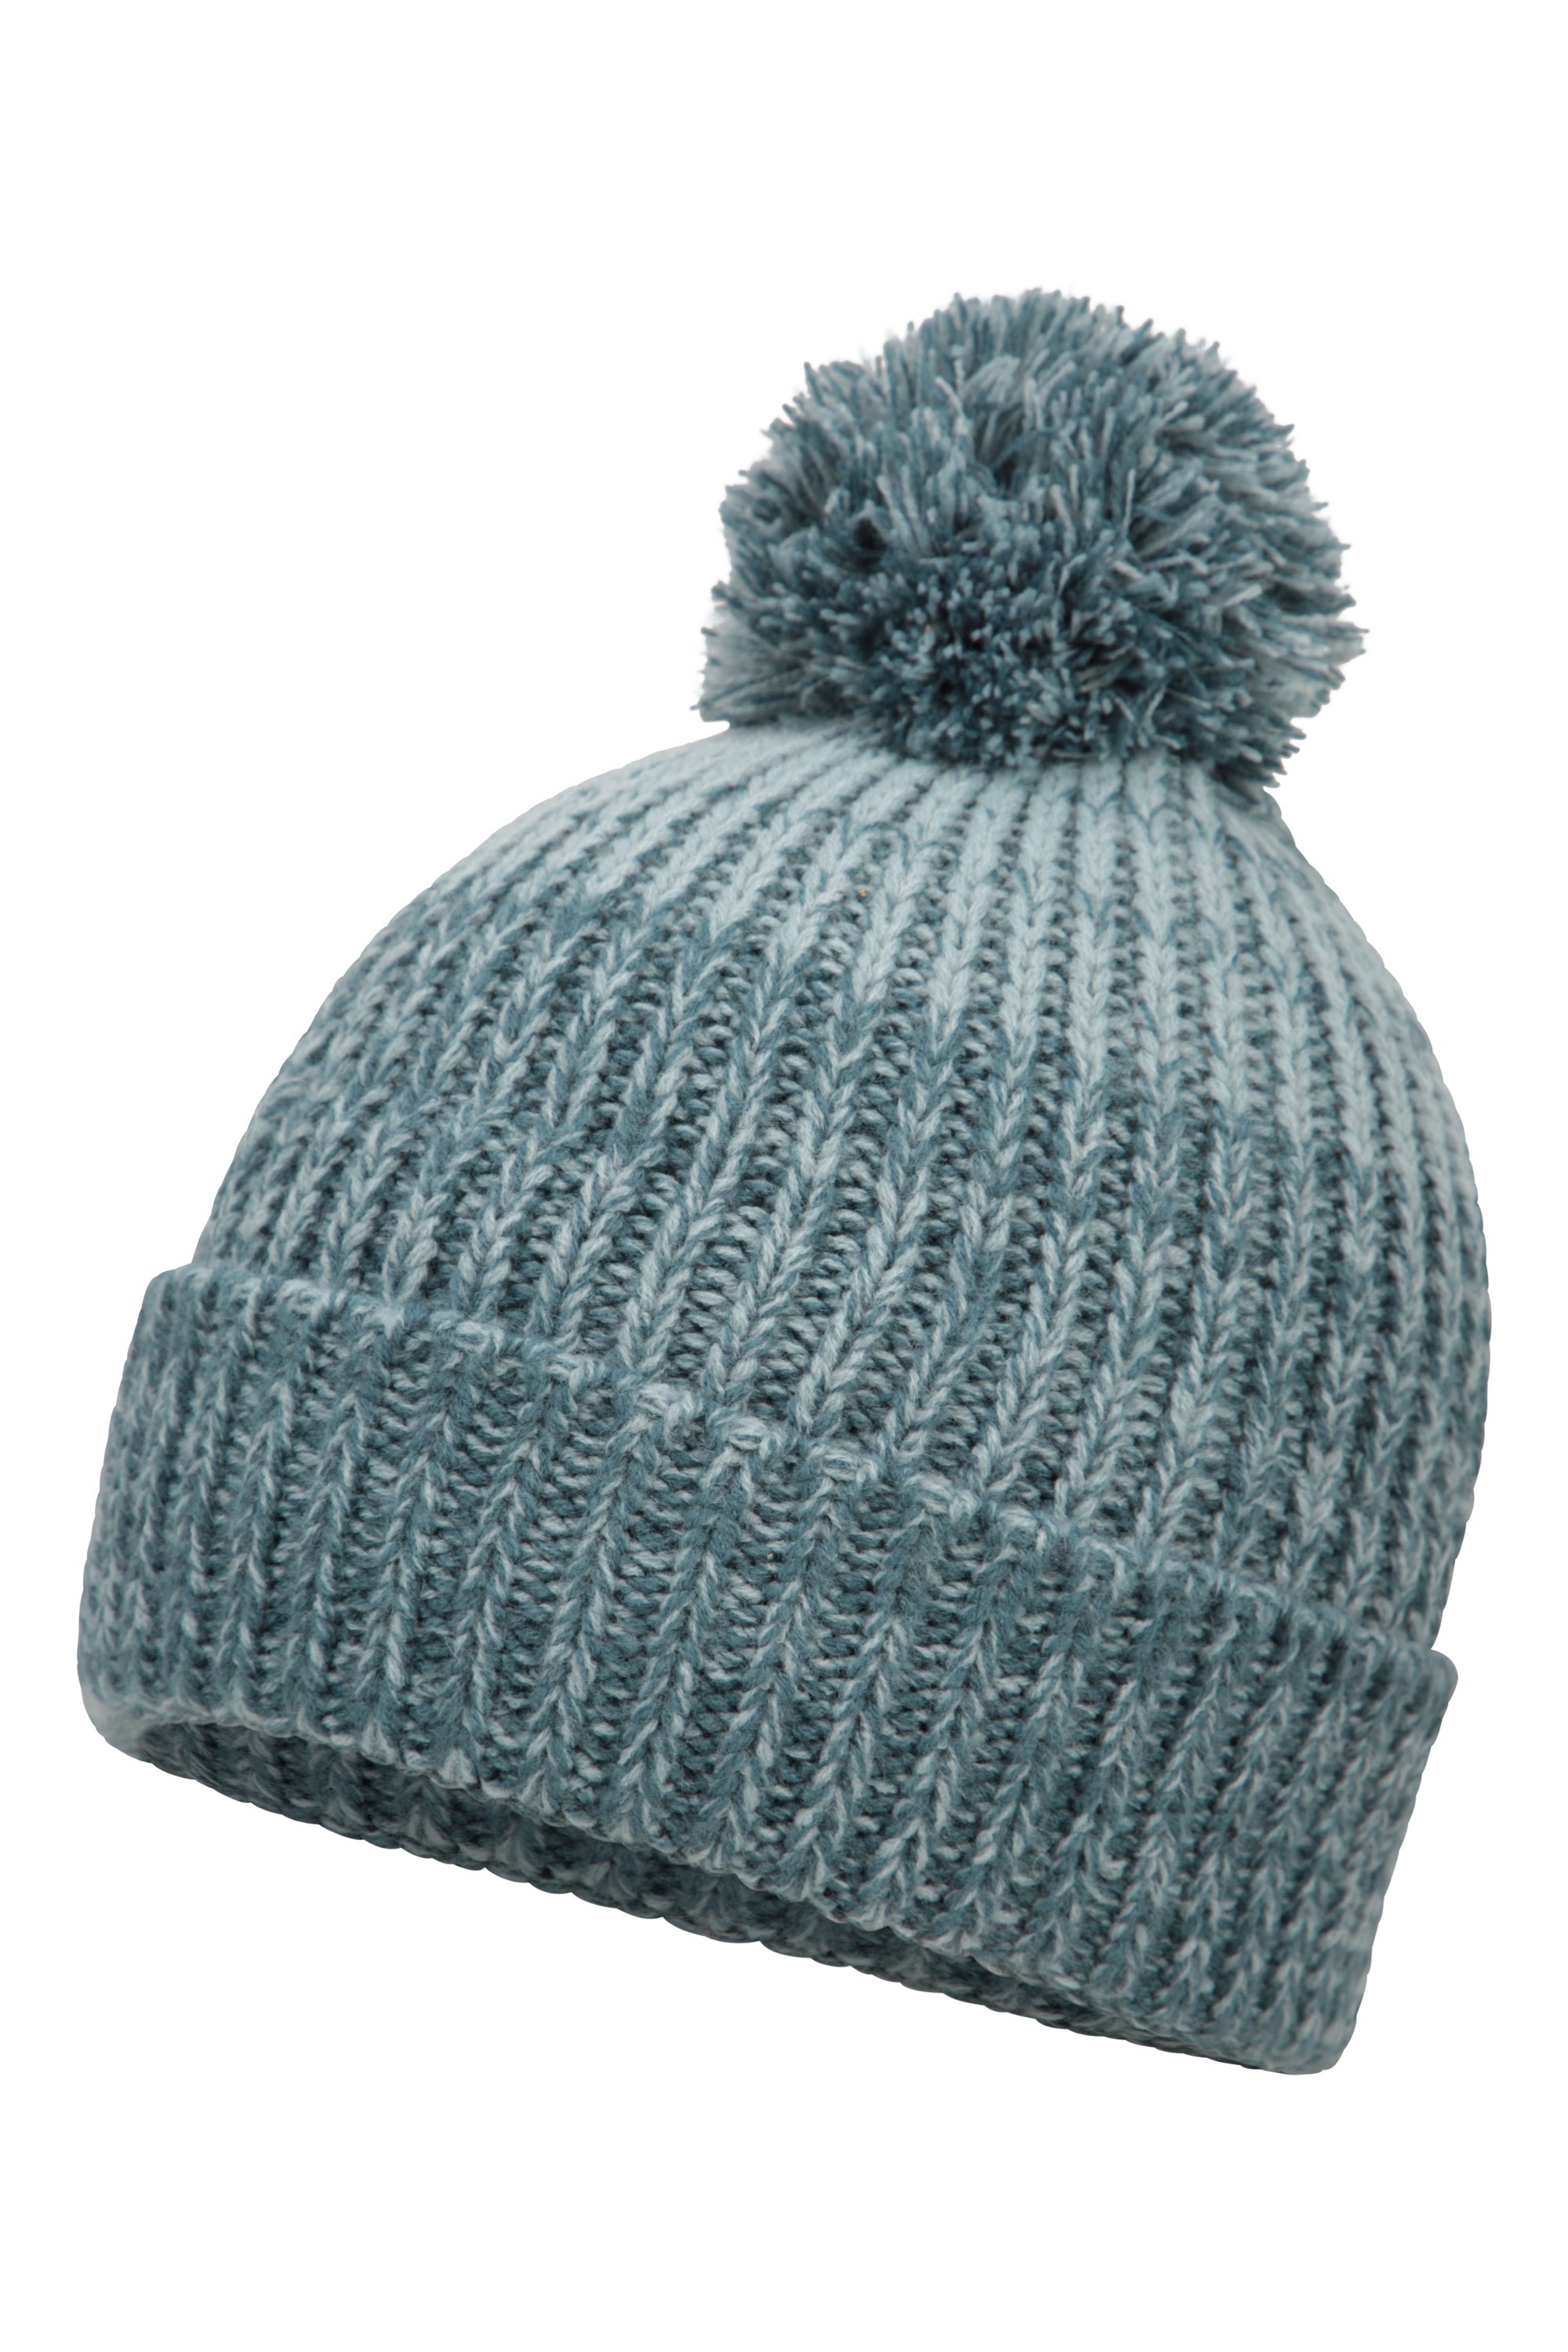 Mountain Warehouse Mountain Warehouse Lined Wooly Hat Women's 